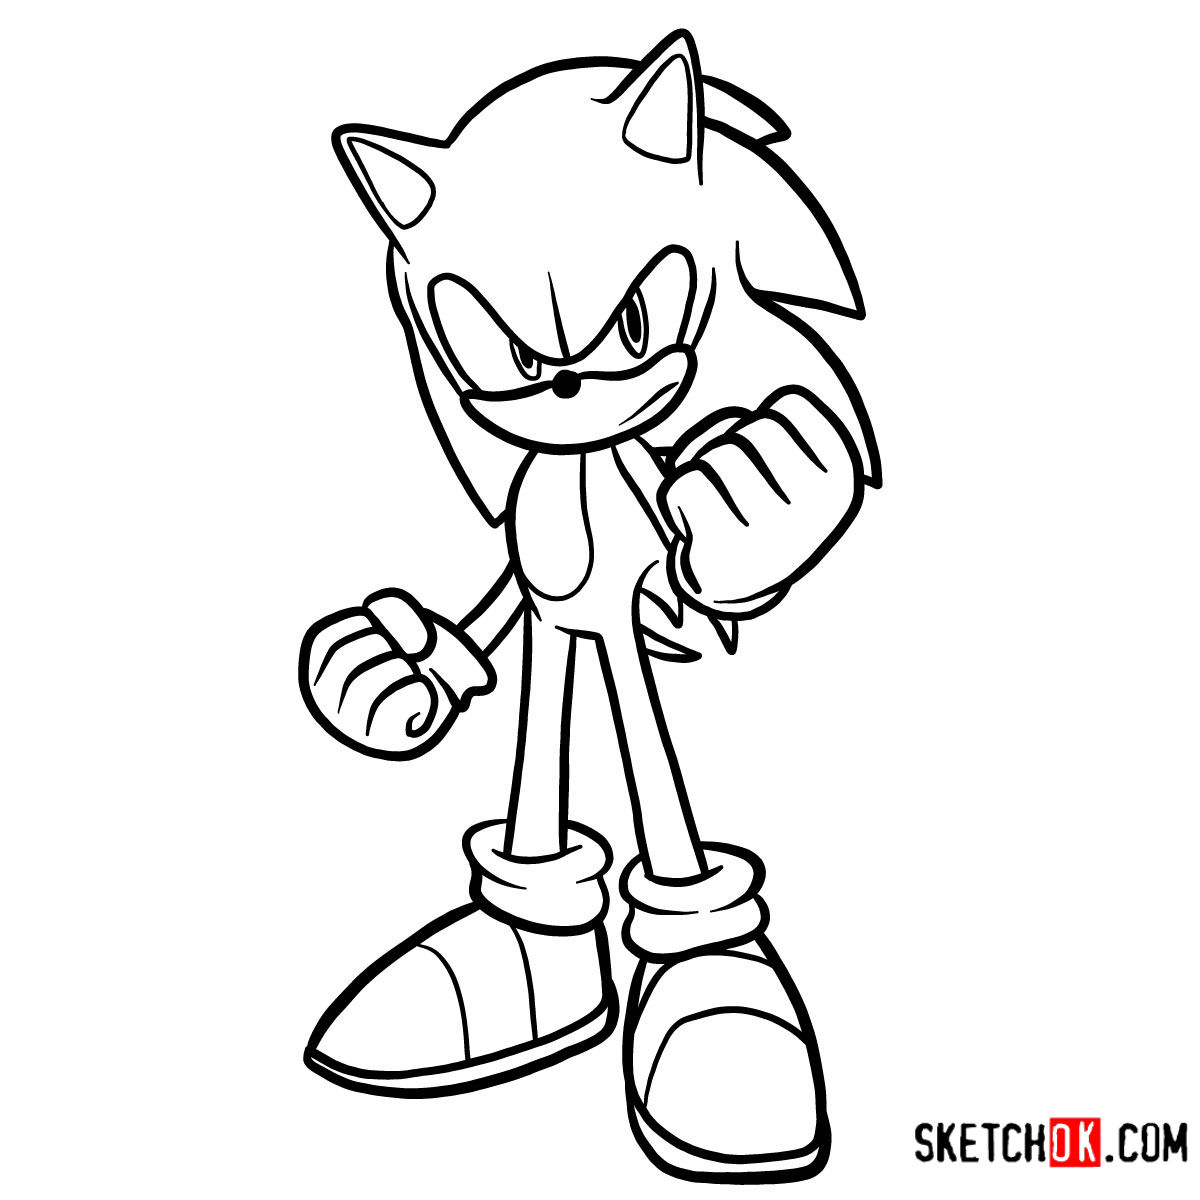 How to draw Sonic the Hedgehog - Sketchok easy drawing guides